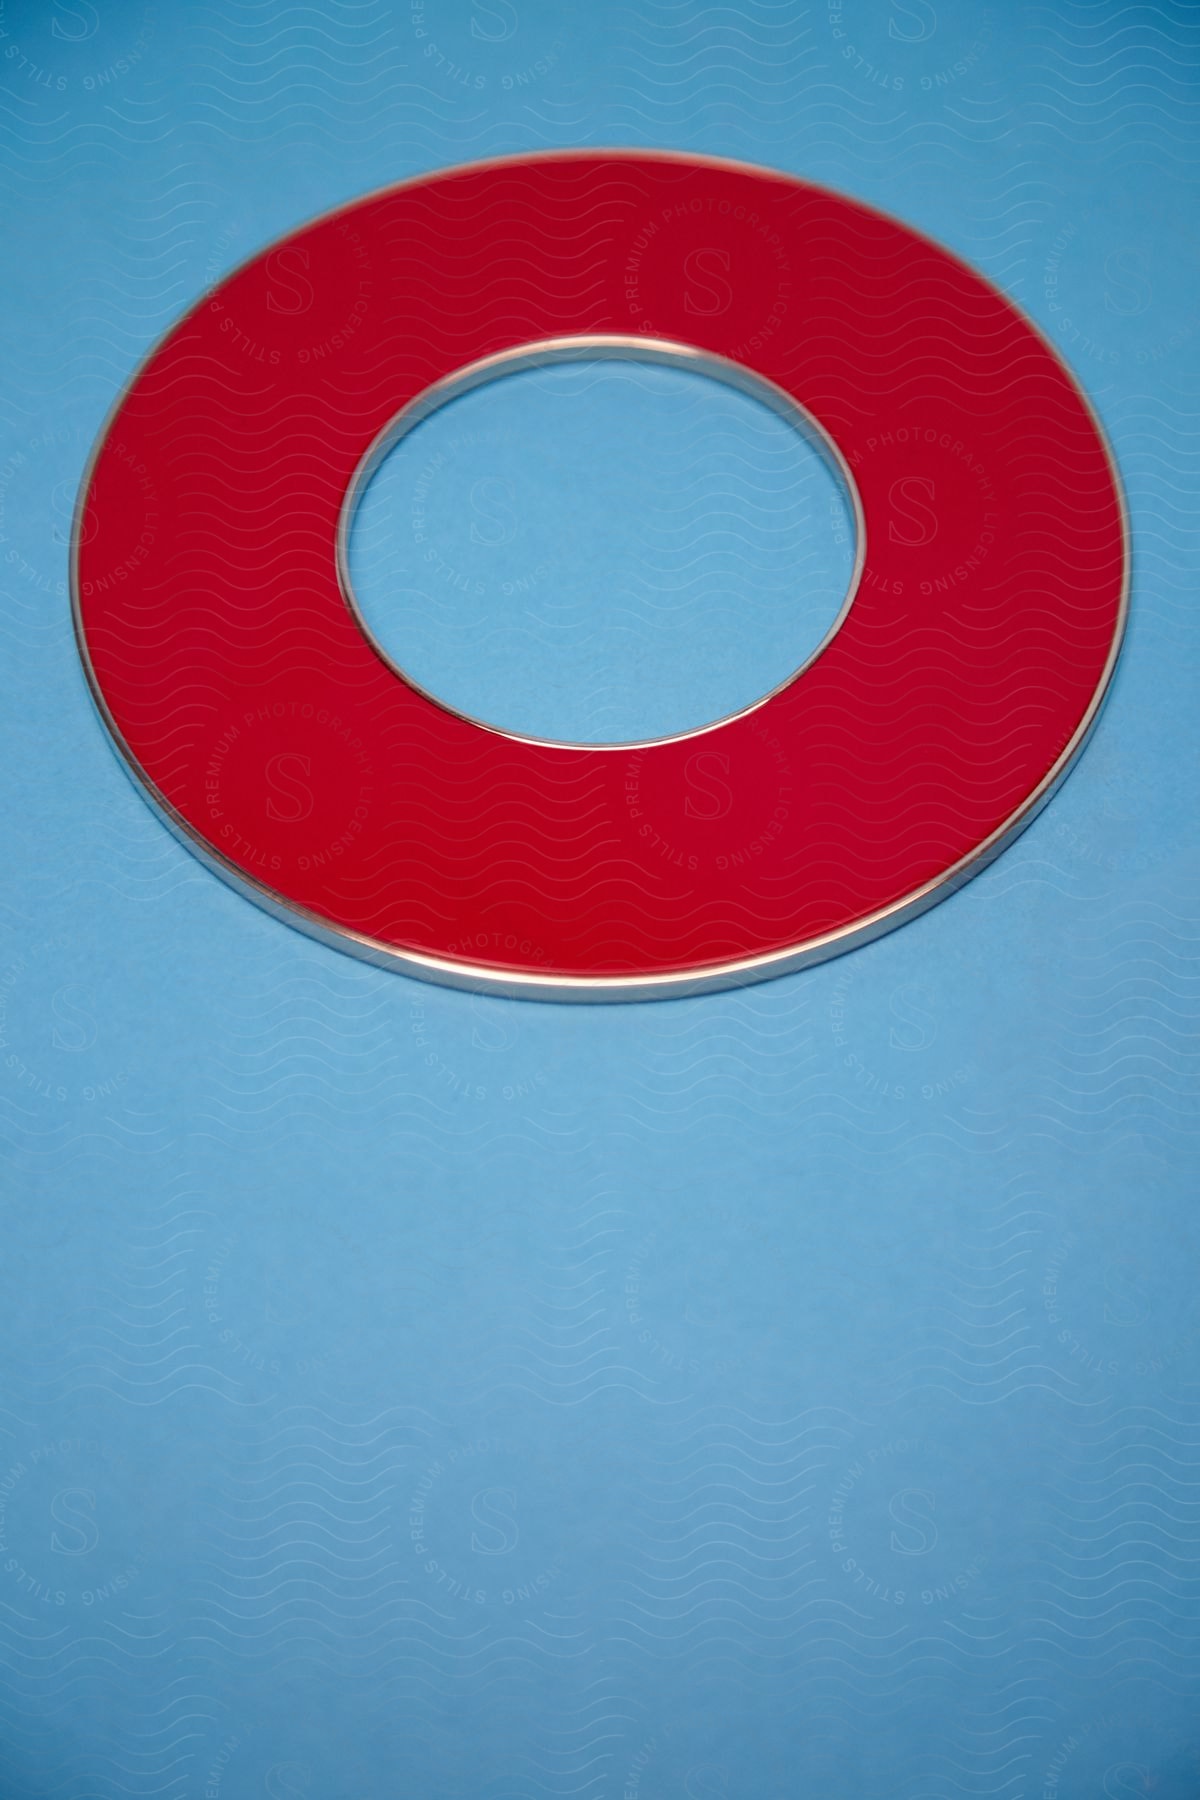 A blue surface with a round red object placed on it